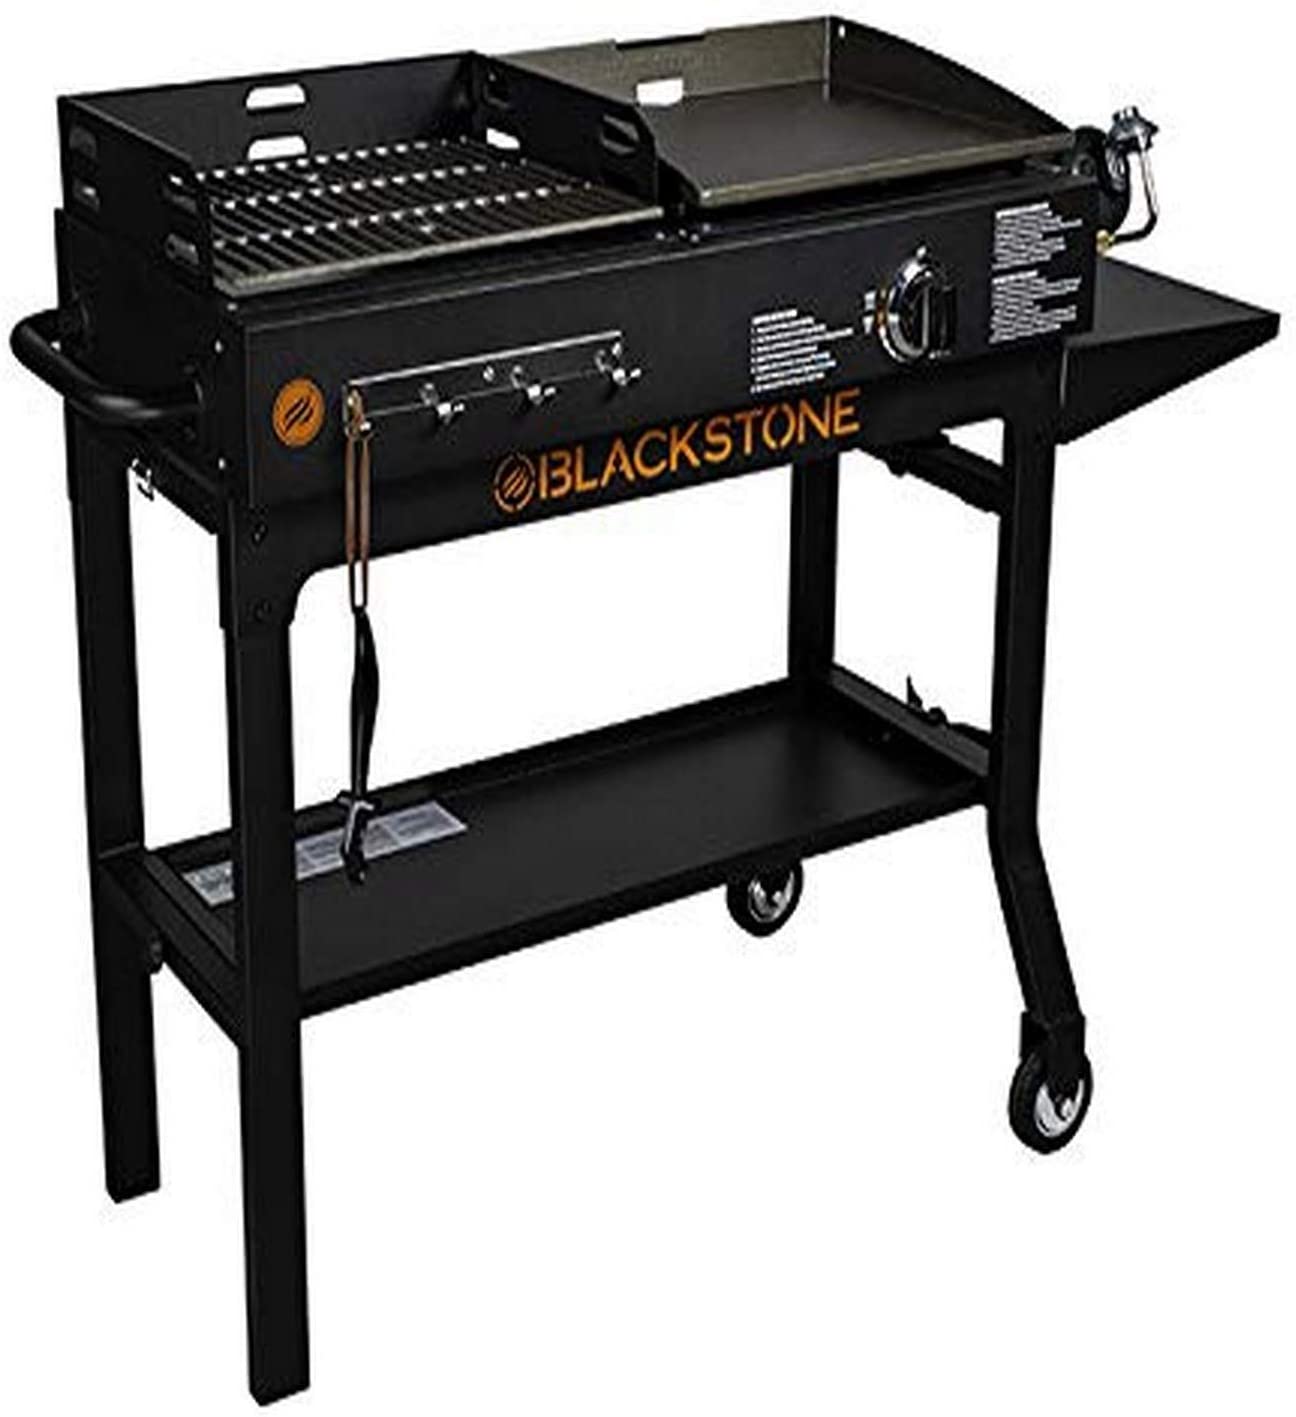 6. Blackstone Griddle and Charcoal Combo